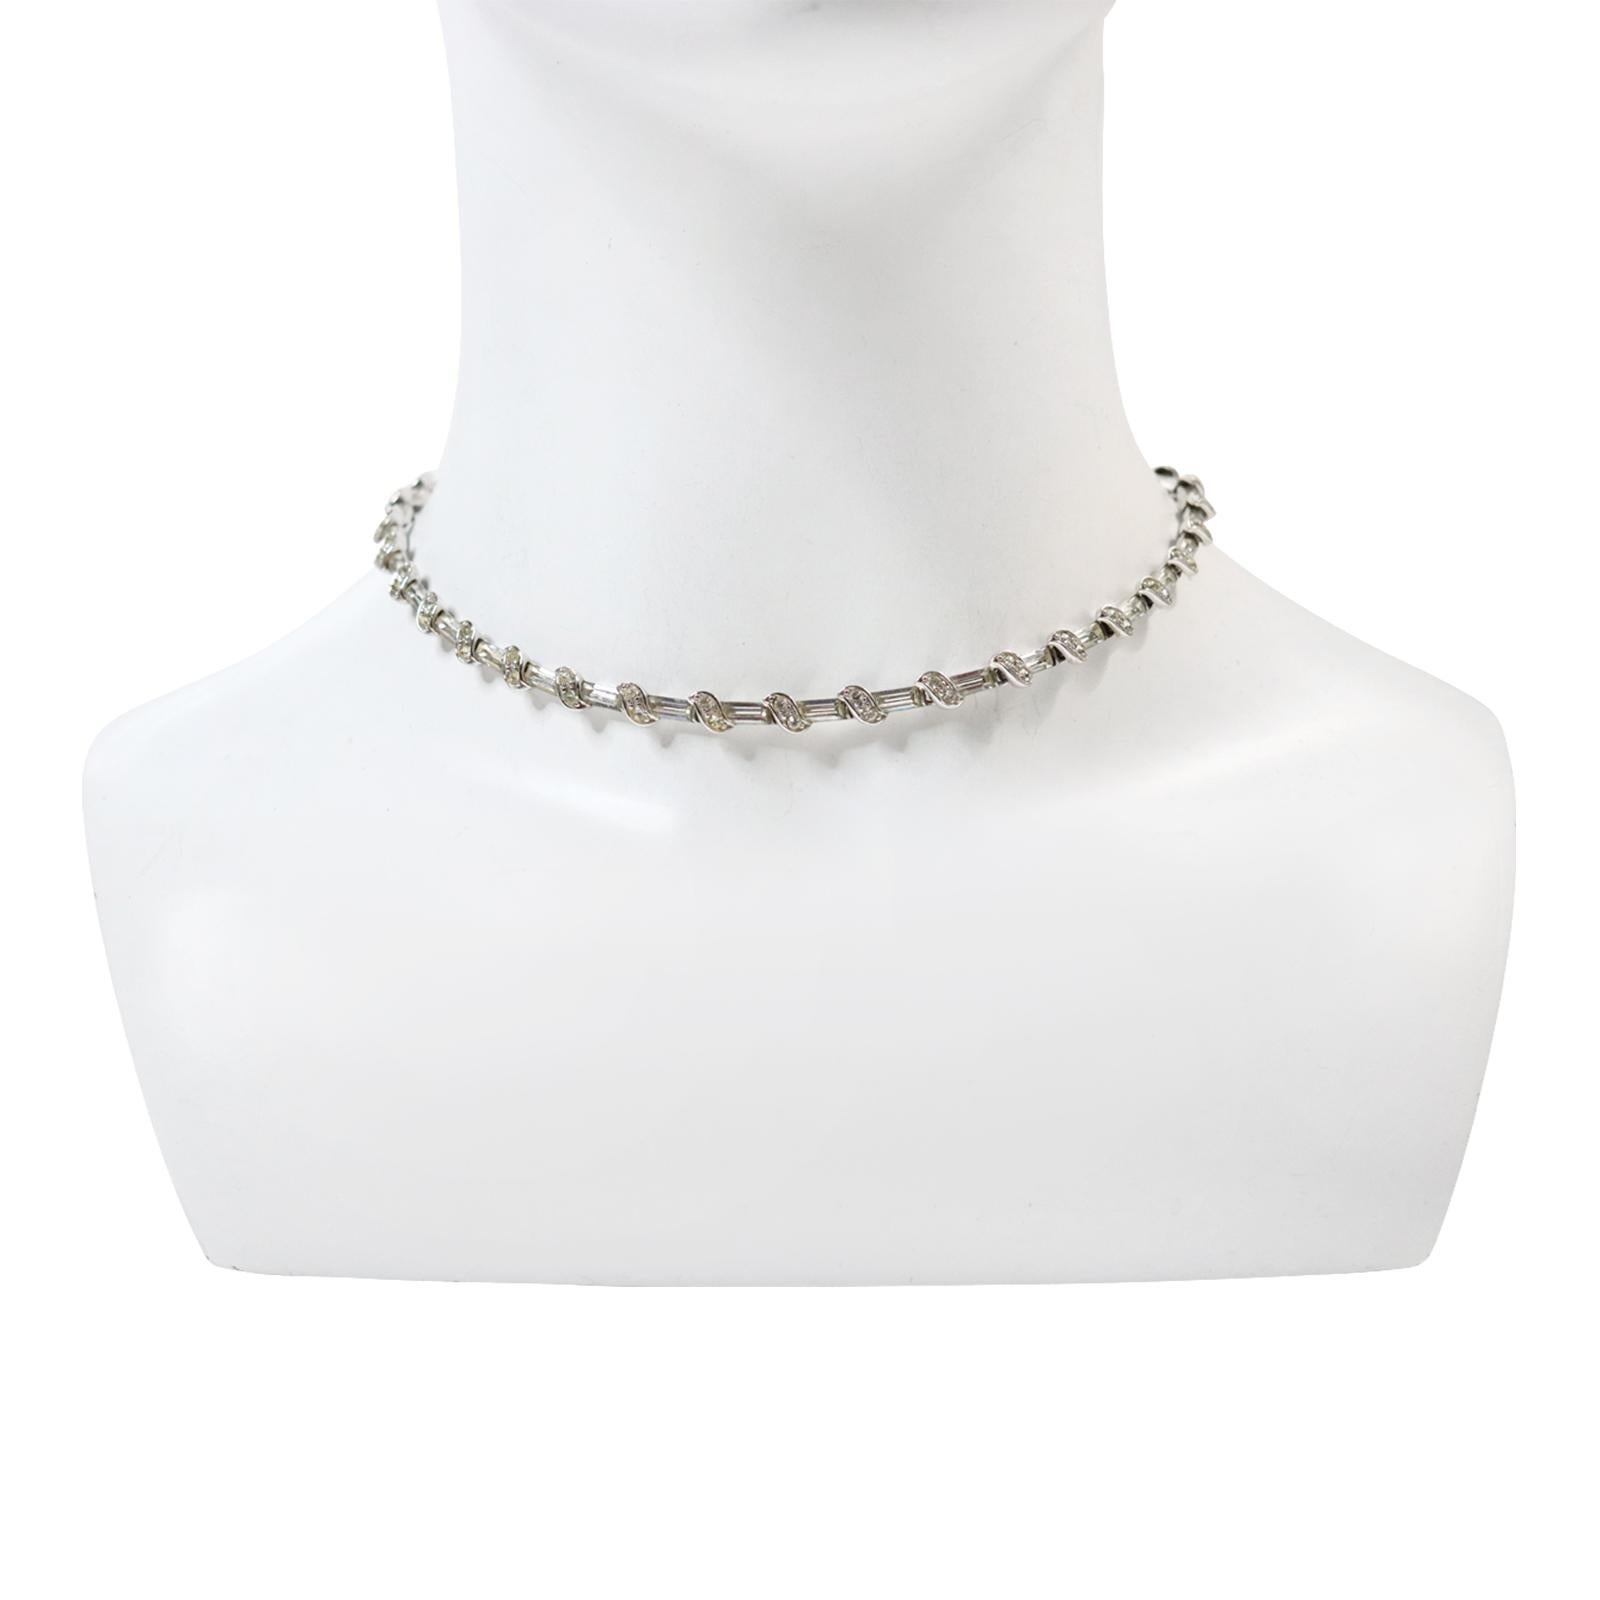 Vintage Pennino Baguette and Link Art Deco Choker Necklace Circa 1960s In Good Condition For Sale In New York, NY